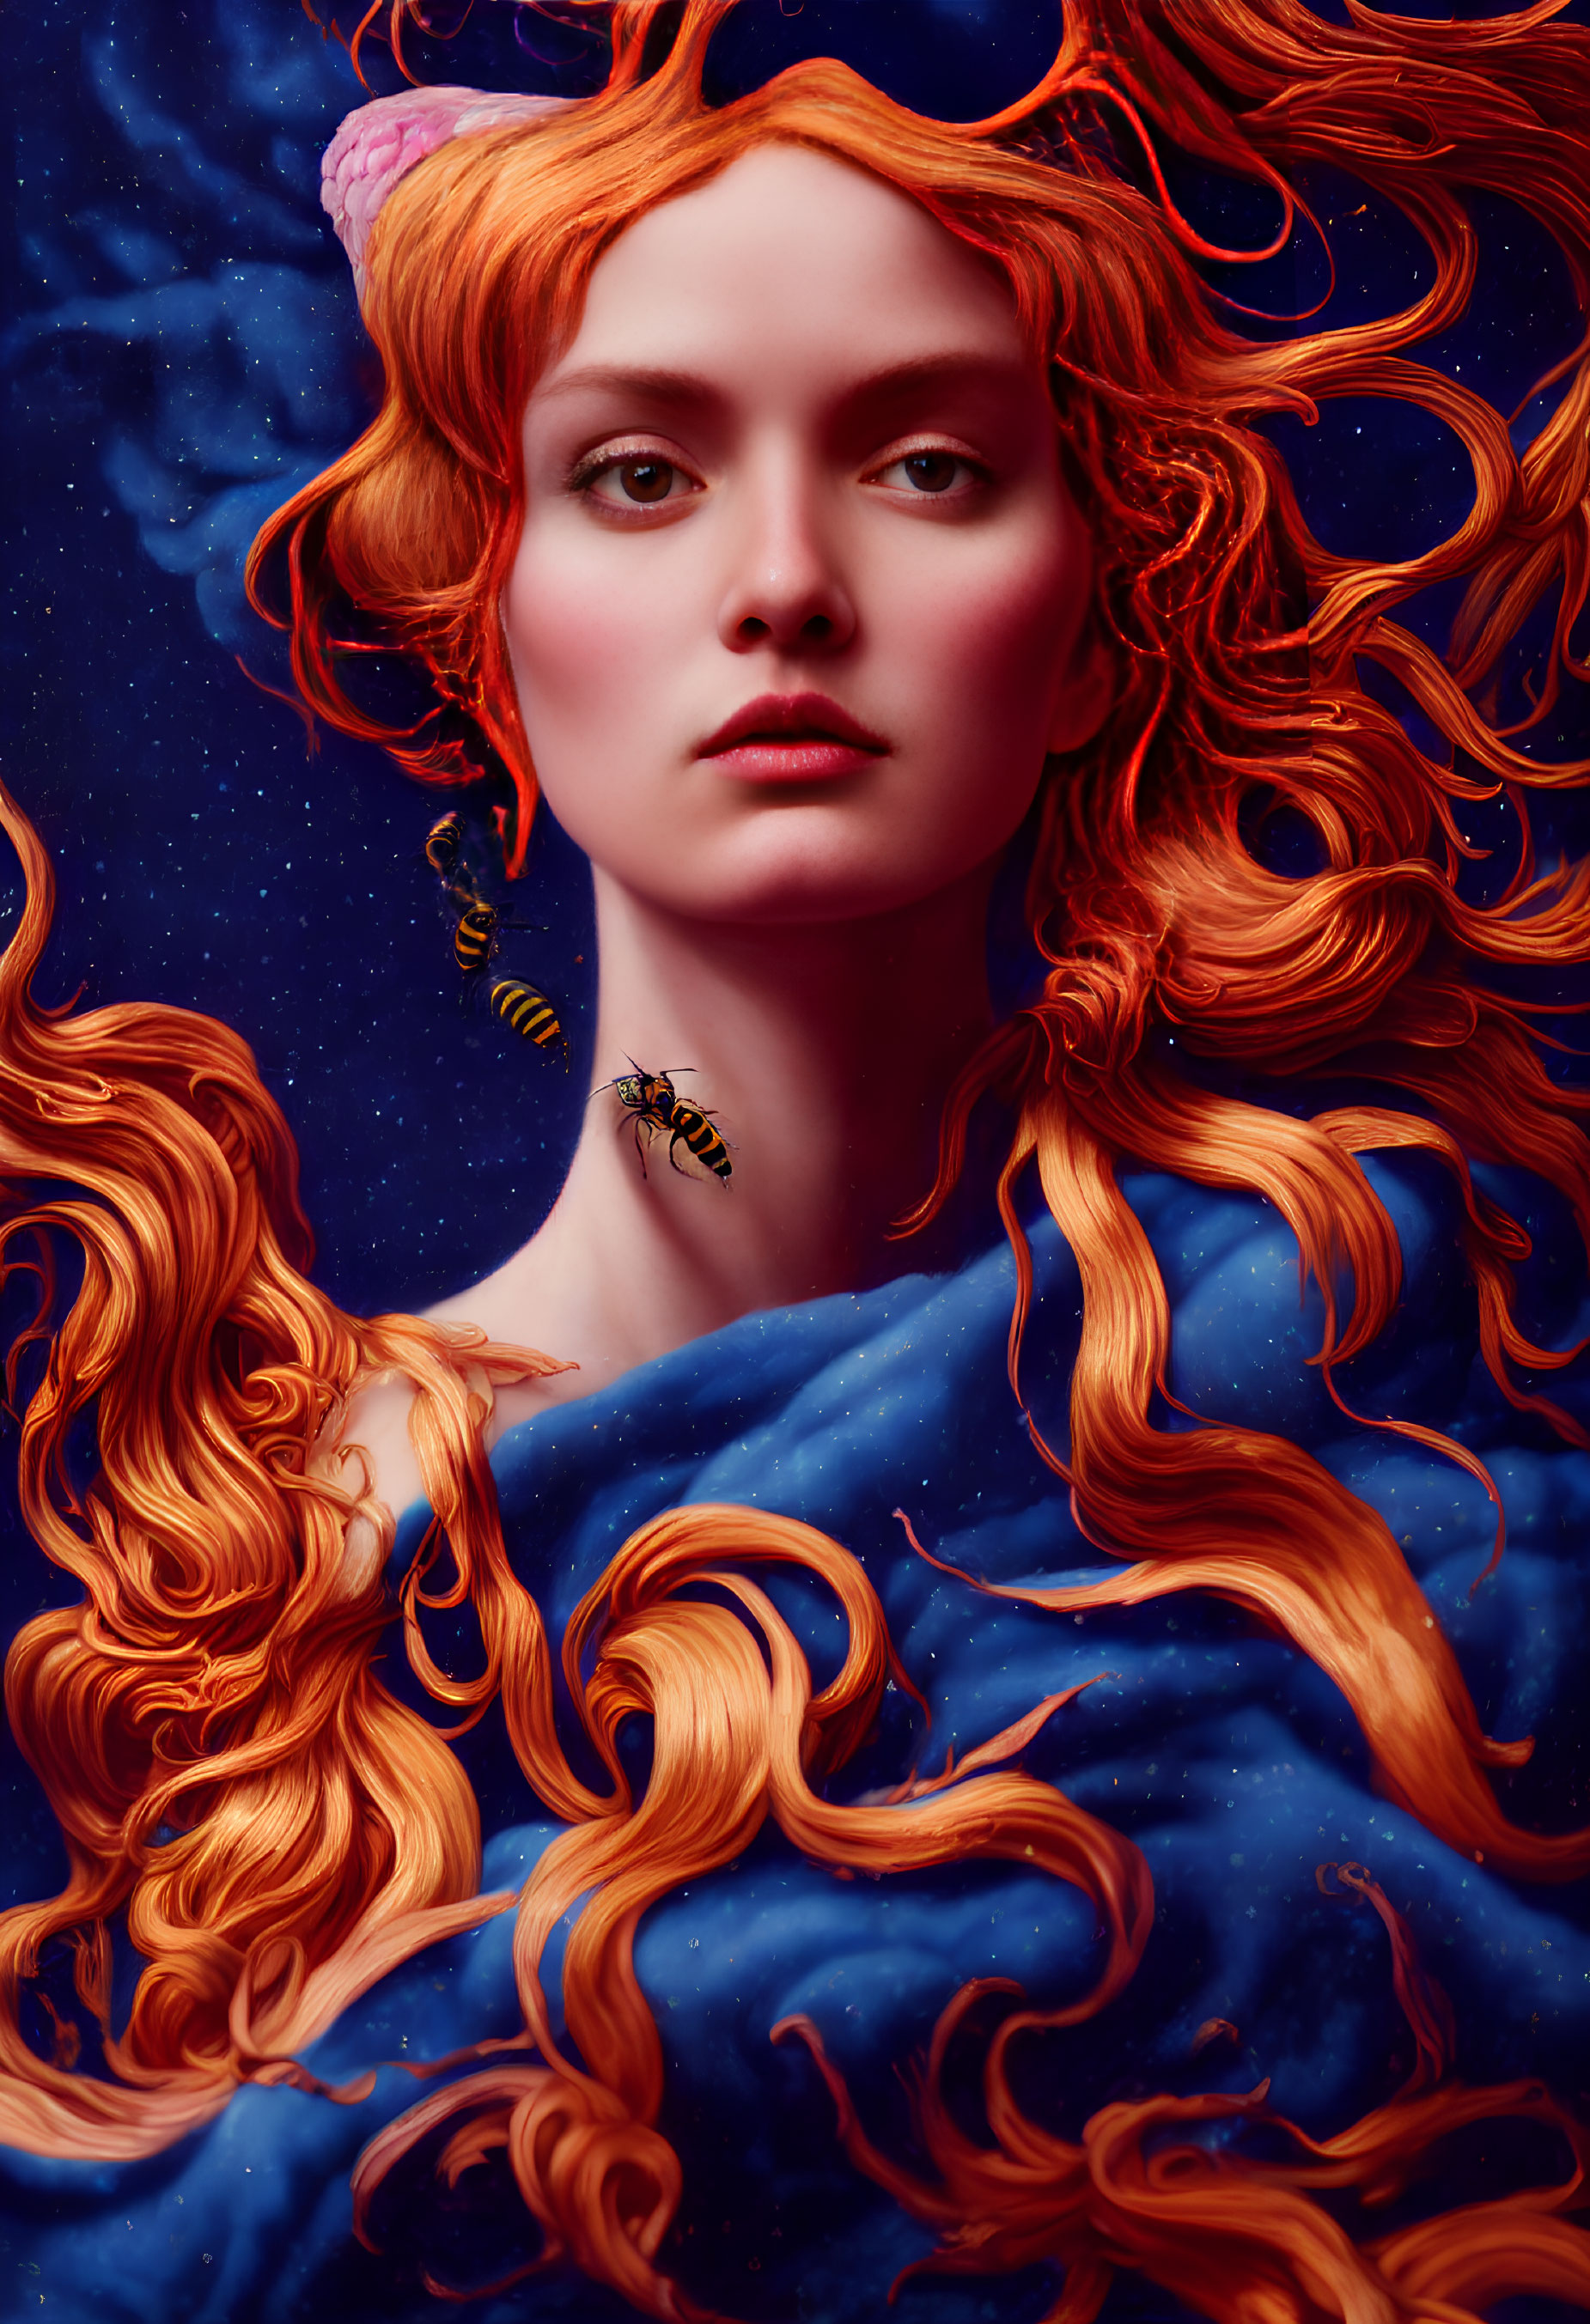 Red-haired woman with swirling hair and bee on shoulder against starry blue backdrop